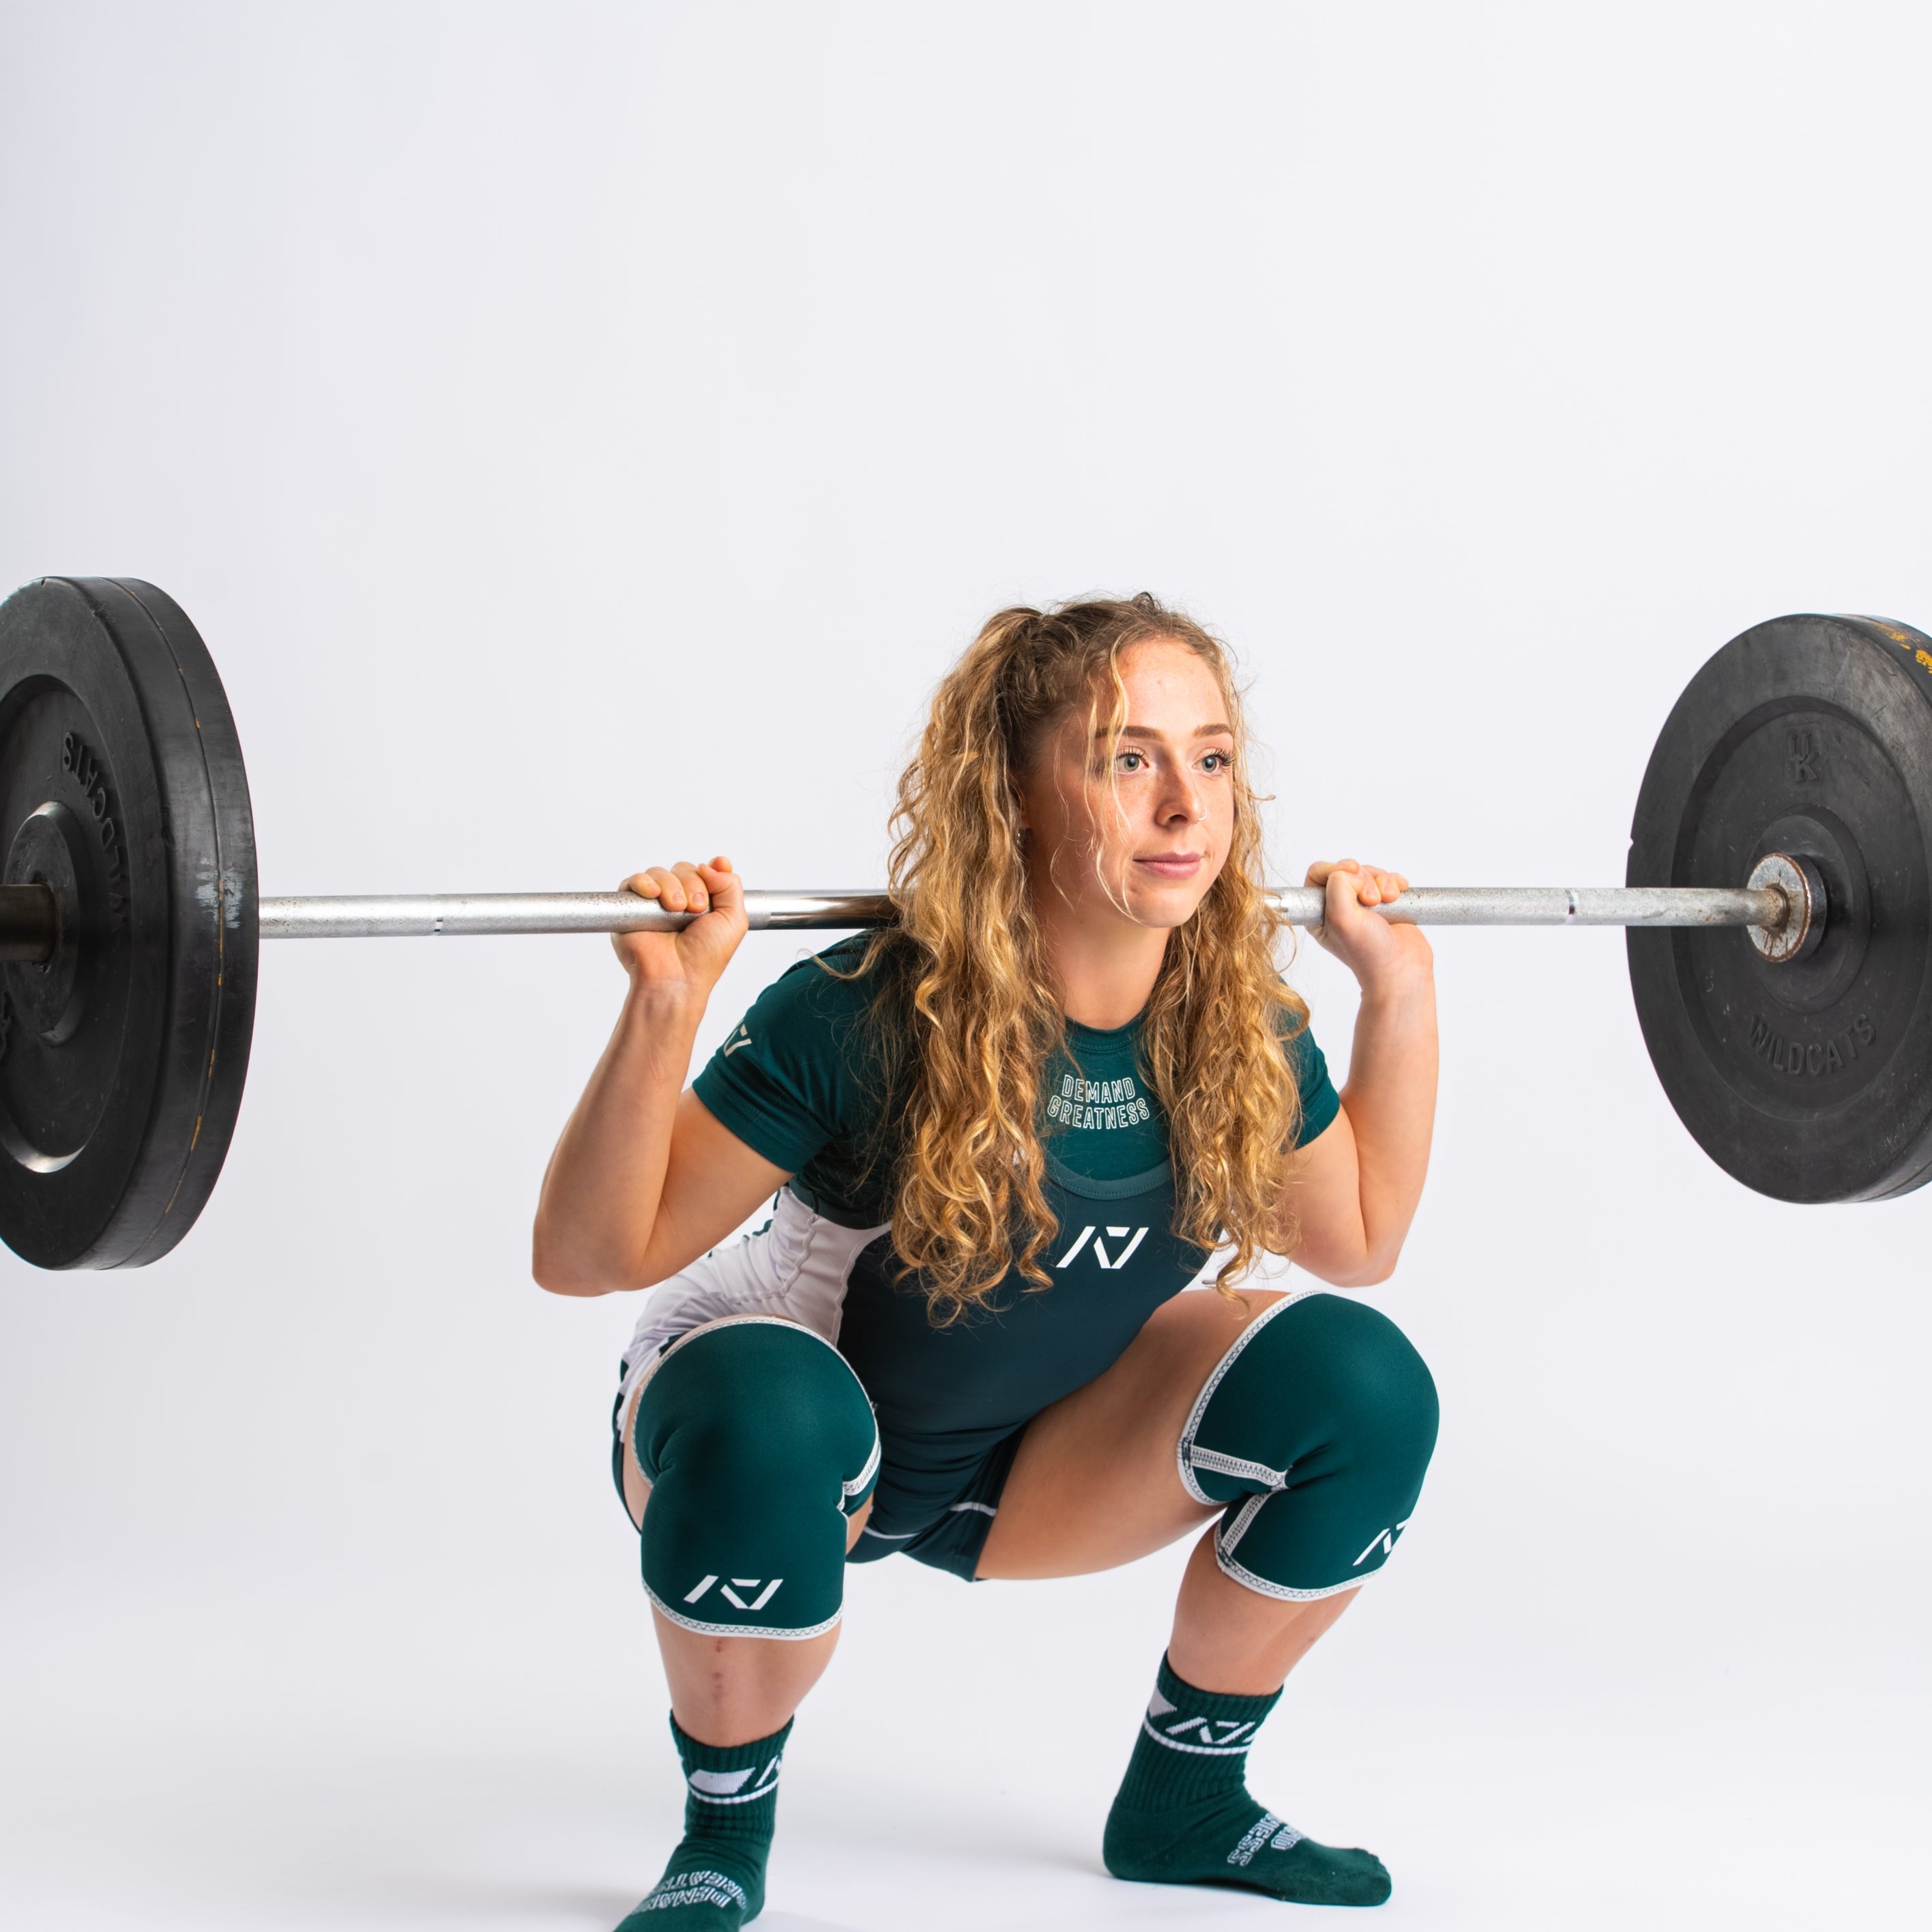 A7 IPF Approved Emerald Forás Luno singlet features extra lat mobility, side panel stitching to guide the squat depth level and curved panel design for a slimming look. The Women's cut singlet features a tapered waist and additional quad room. The IPF Approved Kit includes Luno Powerlifting Singlet, A7 Meet Shirt, A7 Zebra Wrist Wraps, A7 Deadlift Socks, Hourglass Knee Sleeves (Stiff Knee Sleeves and Rigor Mortis Knee Sleeves). All A7 Powerlifting Equipment shipping to UK, Norway, Switzerland and Iceland.